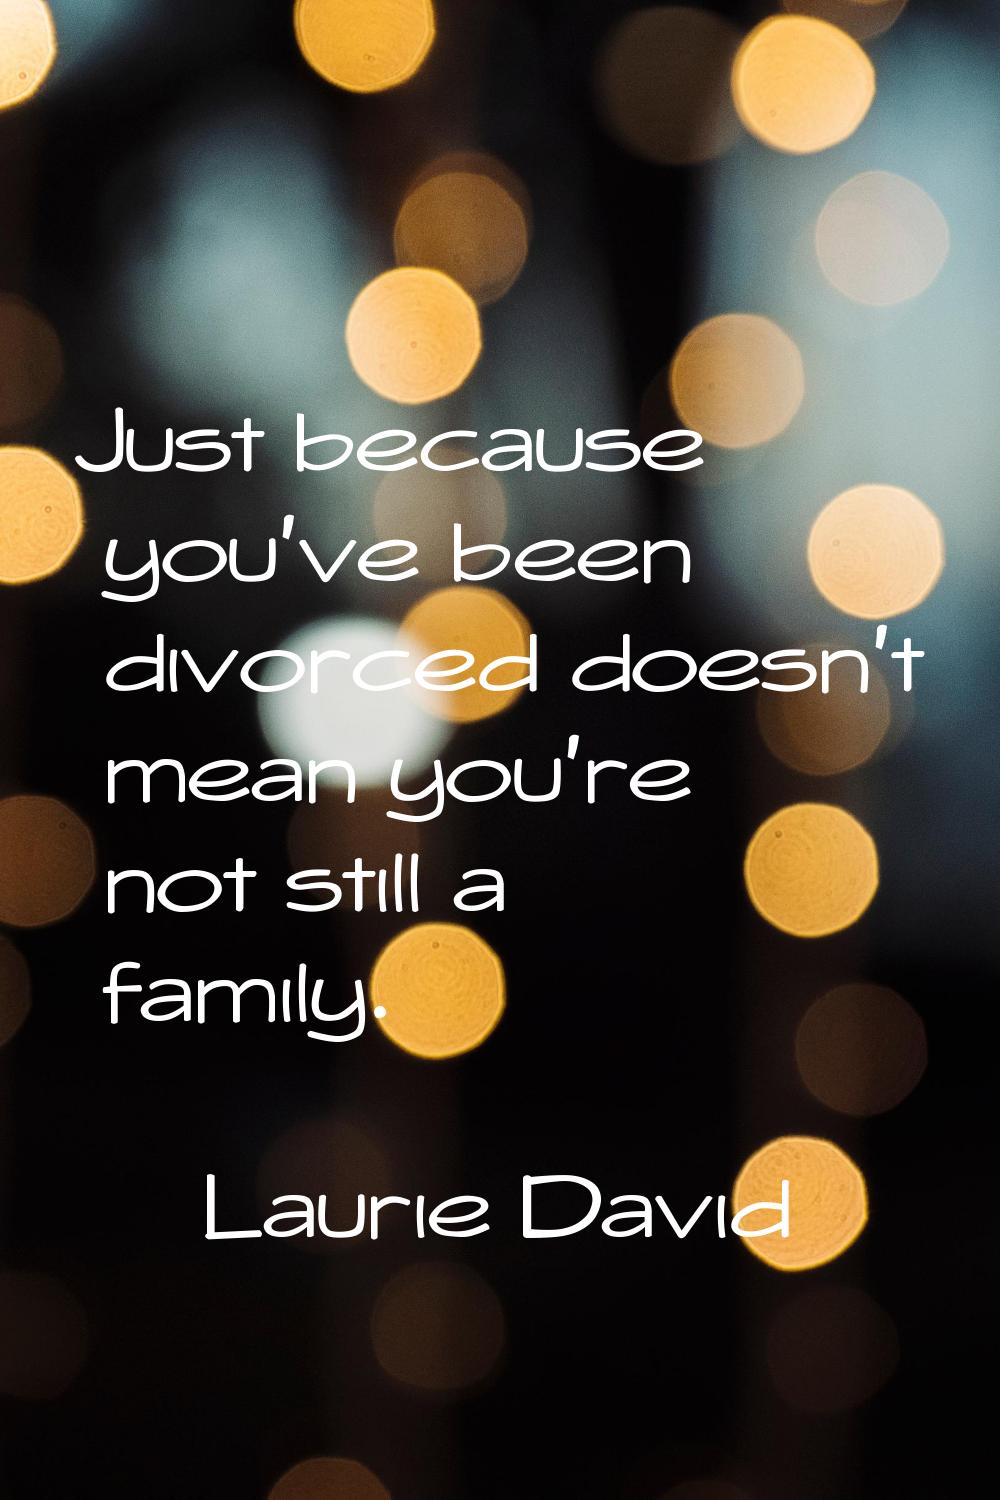 Just because you've been divorced doesn't mean you're not still a family.